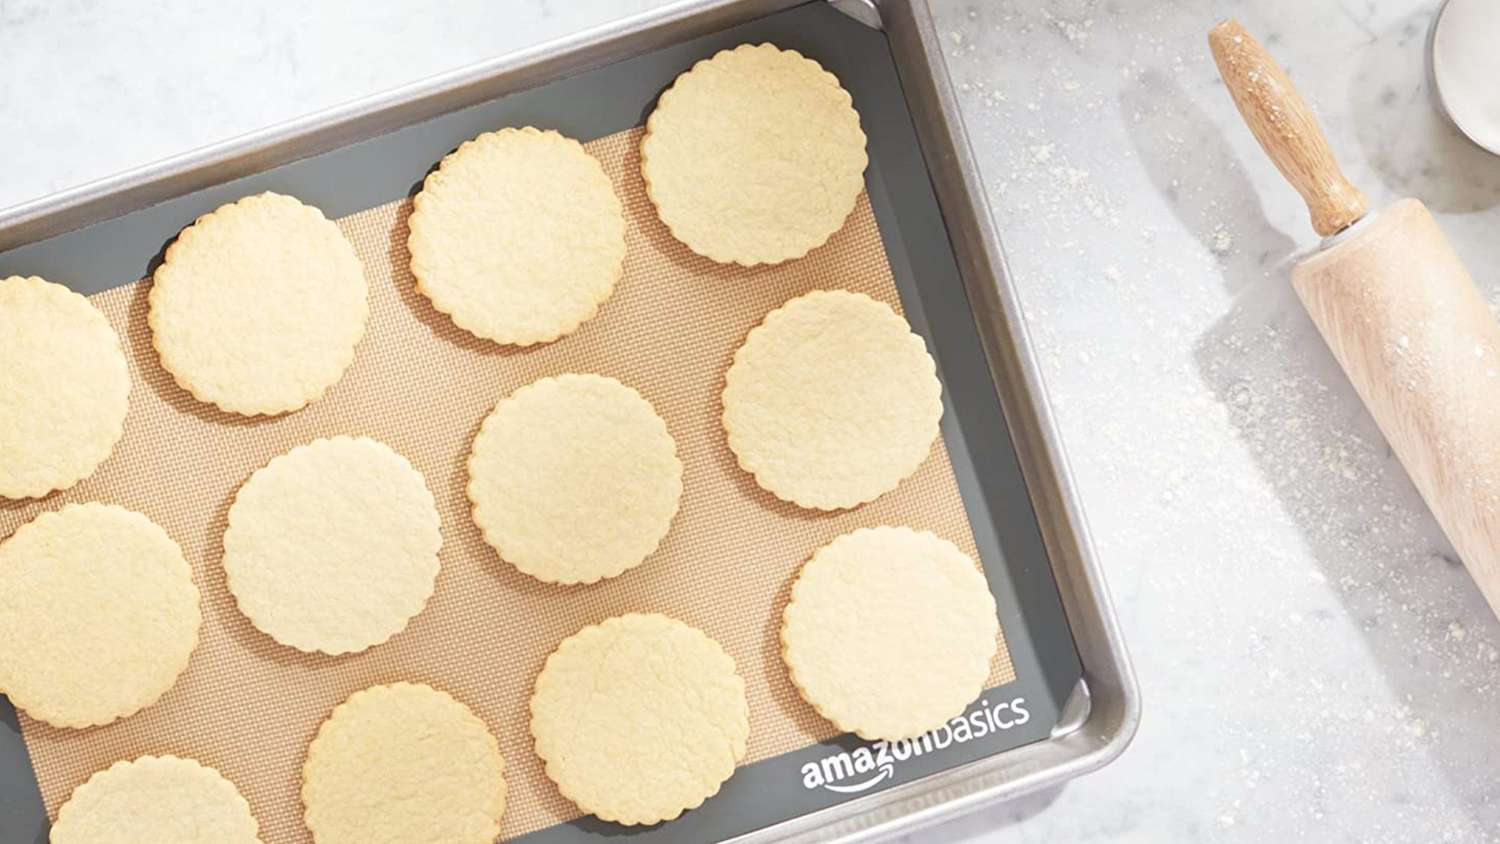 These $14 Baking Sheets Will Help You Make the Perfect Holiday Cookies Every Single Time